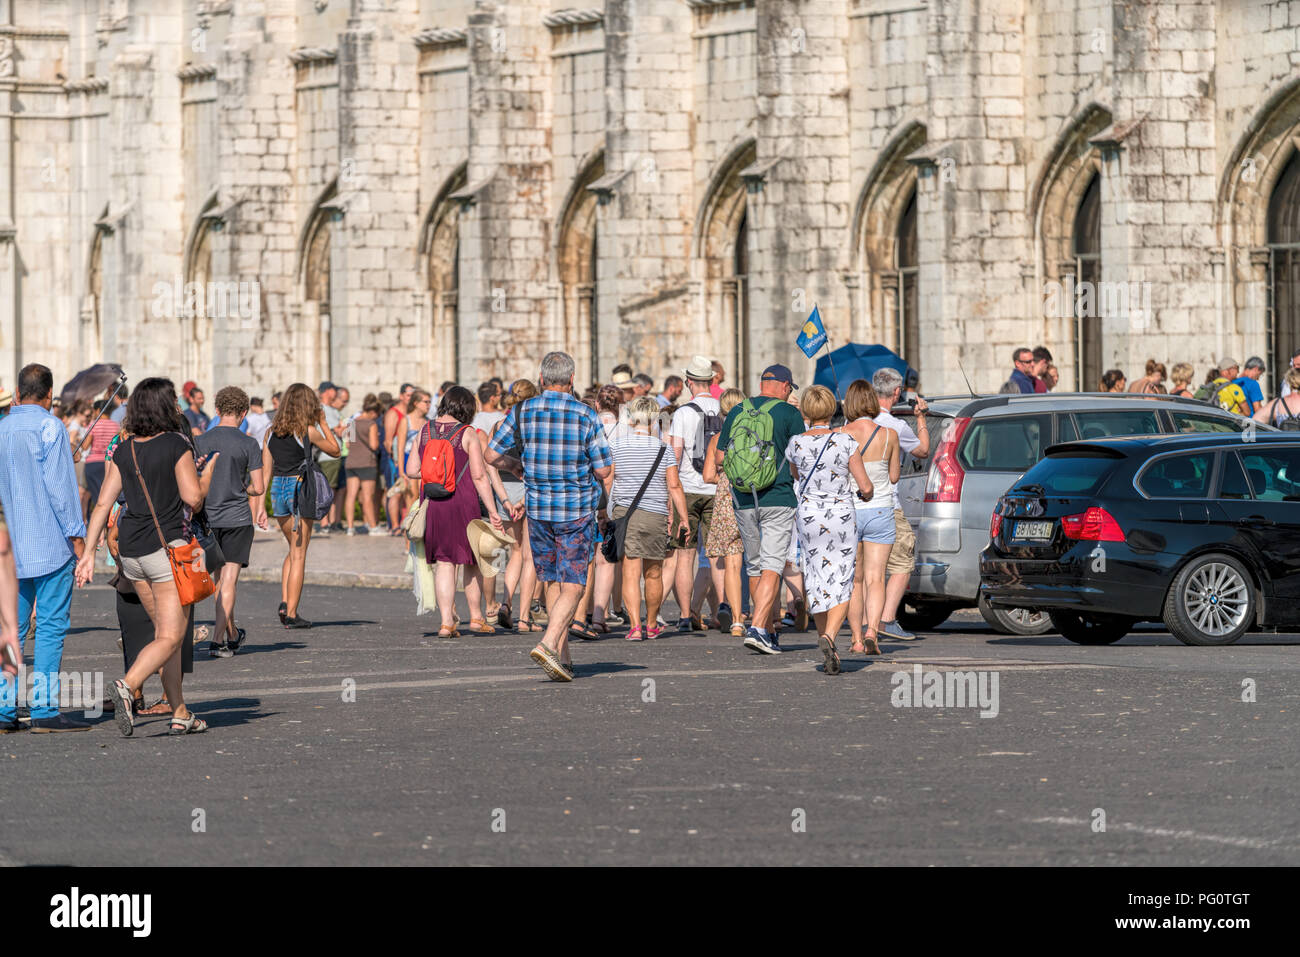 Crowd of people at entrance of Hieronymites Monastery or Mosteiro dos Jeronimos, Lisbon, Belem district Stock Photo